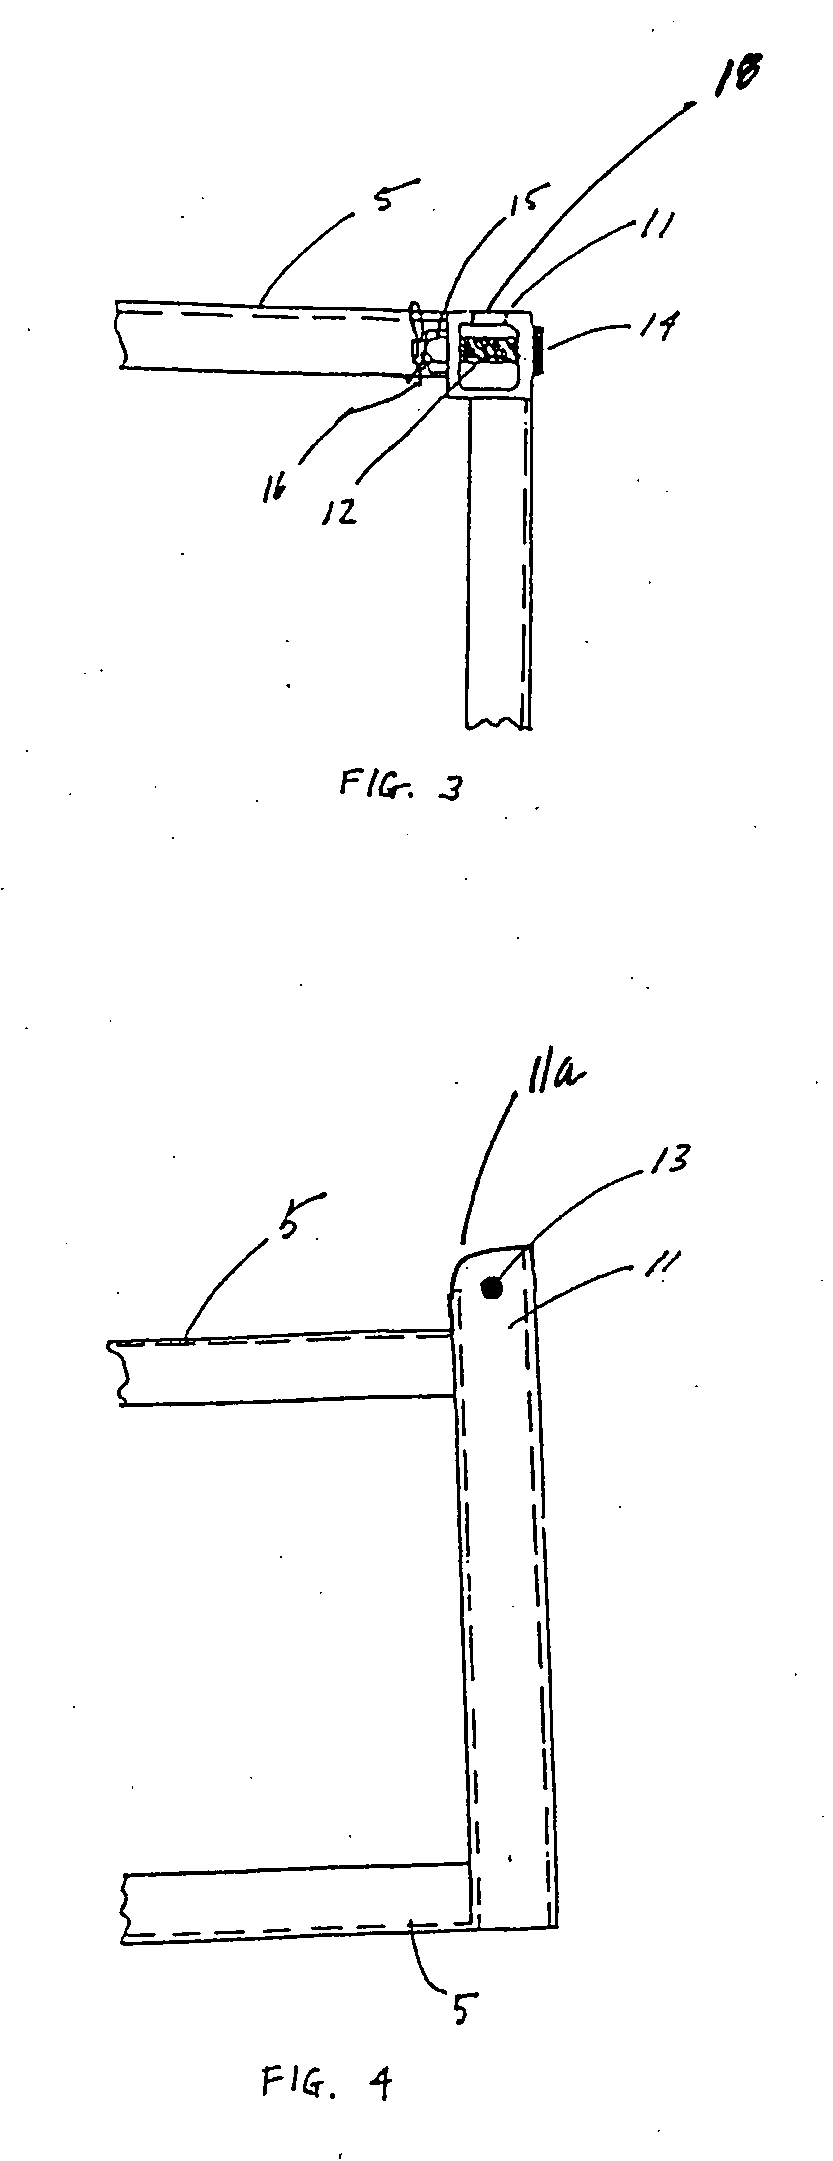 Load supporting apparatus with integrated coupling for lifting